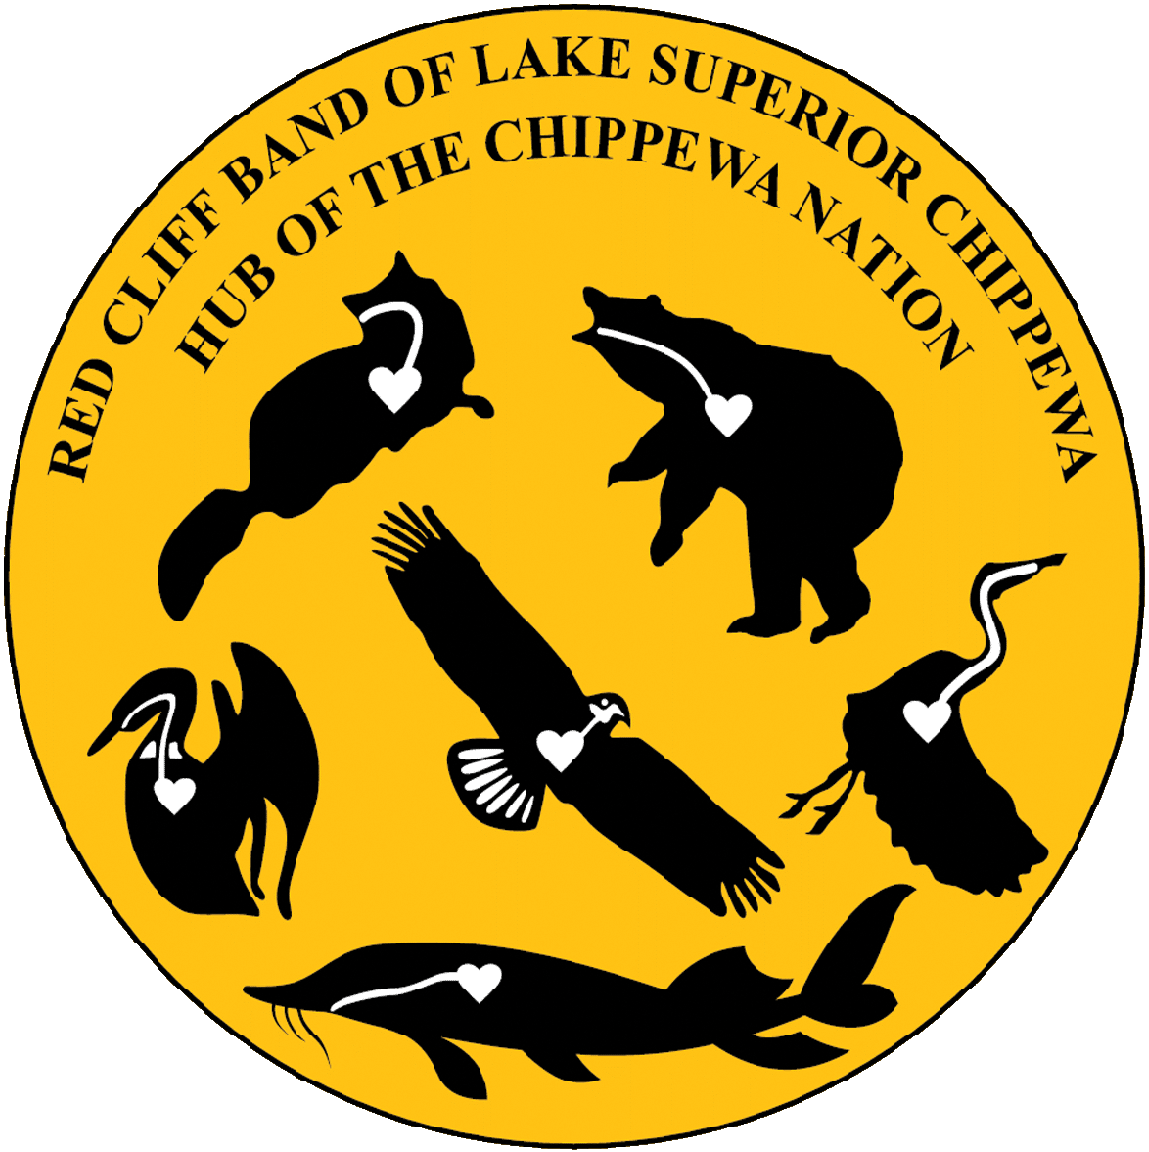 Red Cliff Logo - Red Cliff Band of Lake Superior Chippewa | Wisconsin Department of ...